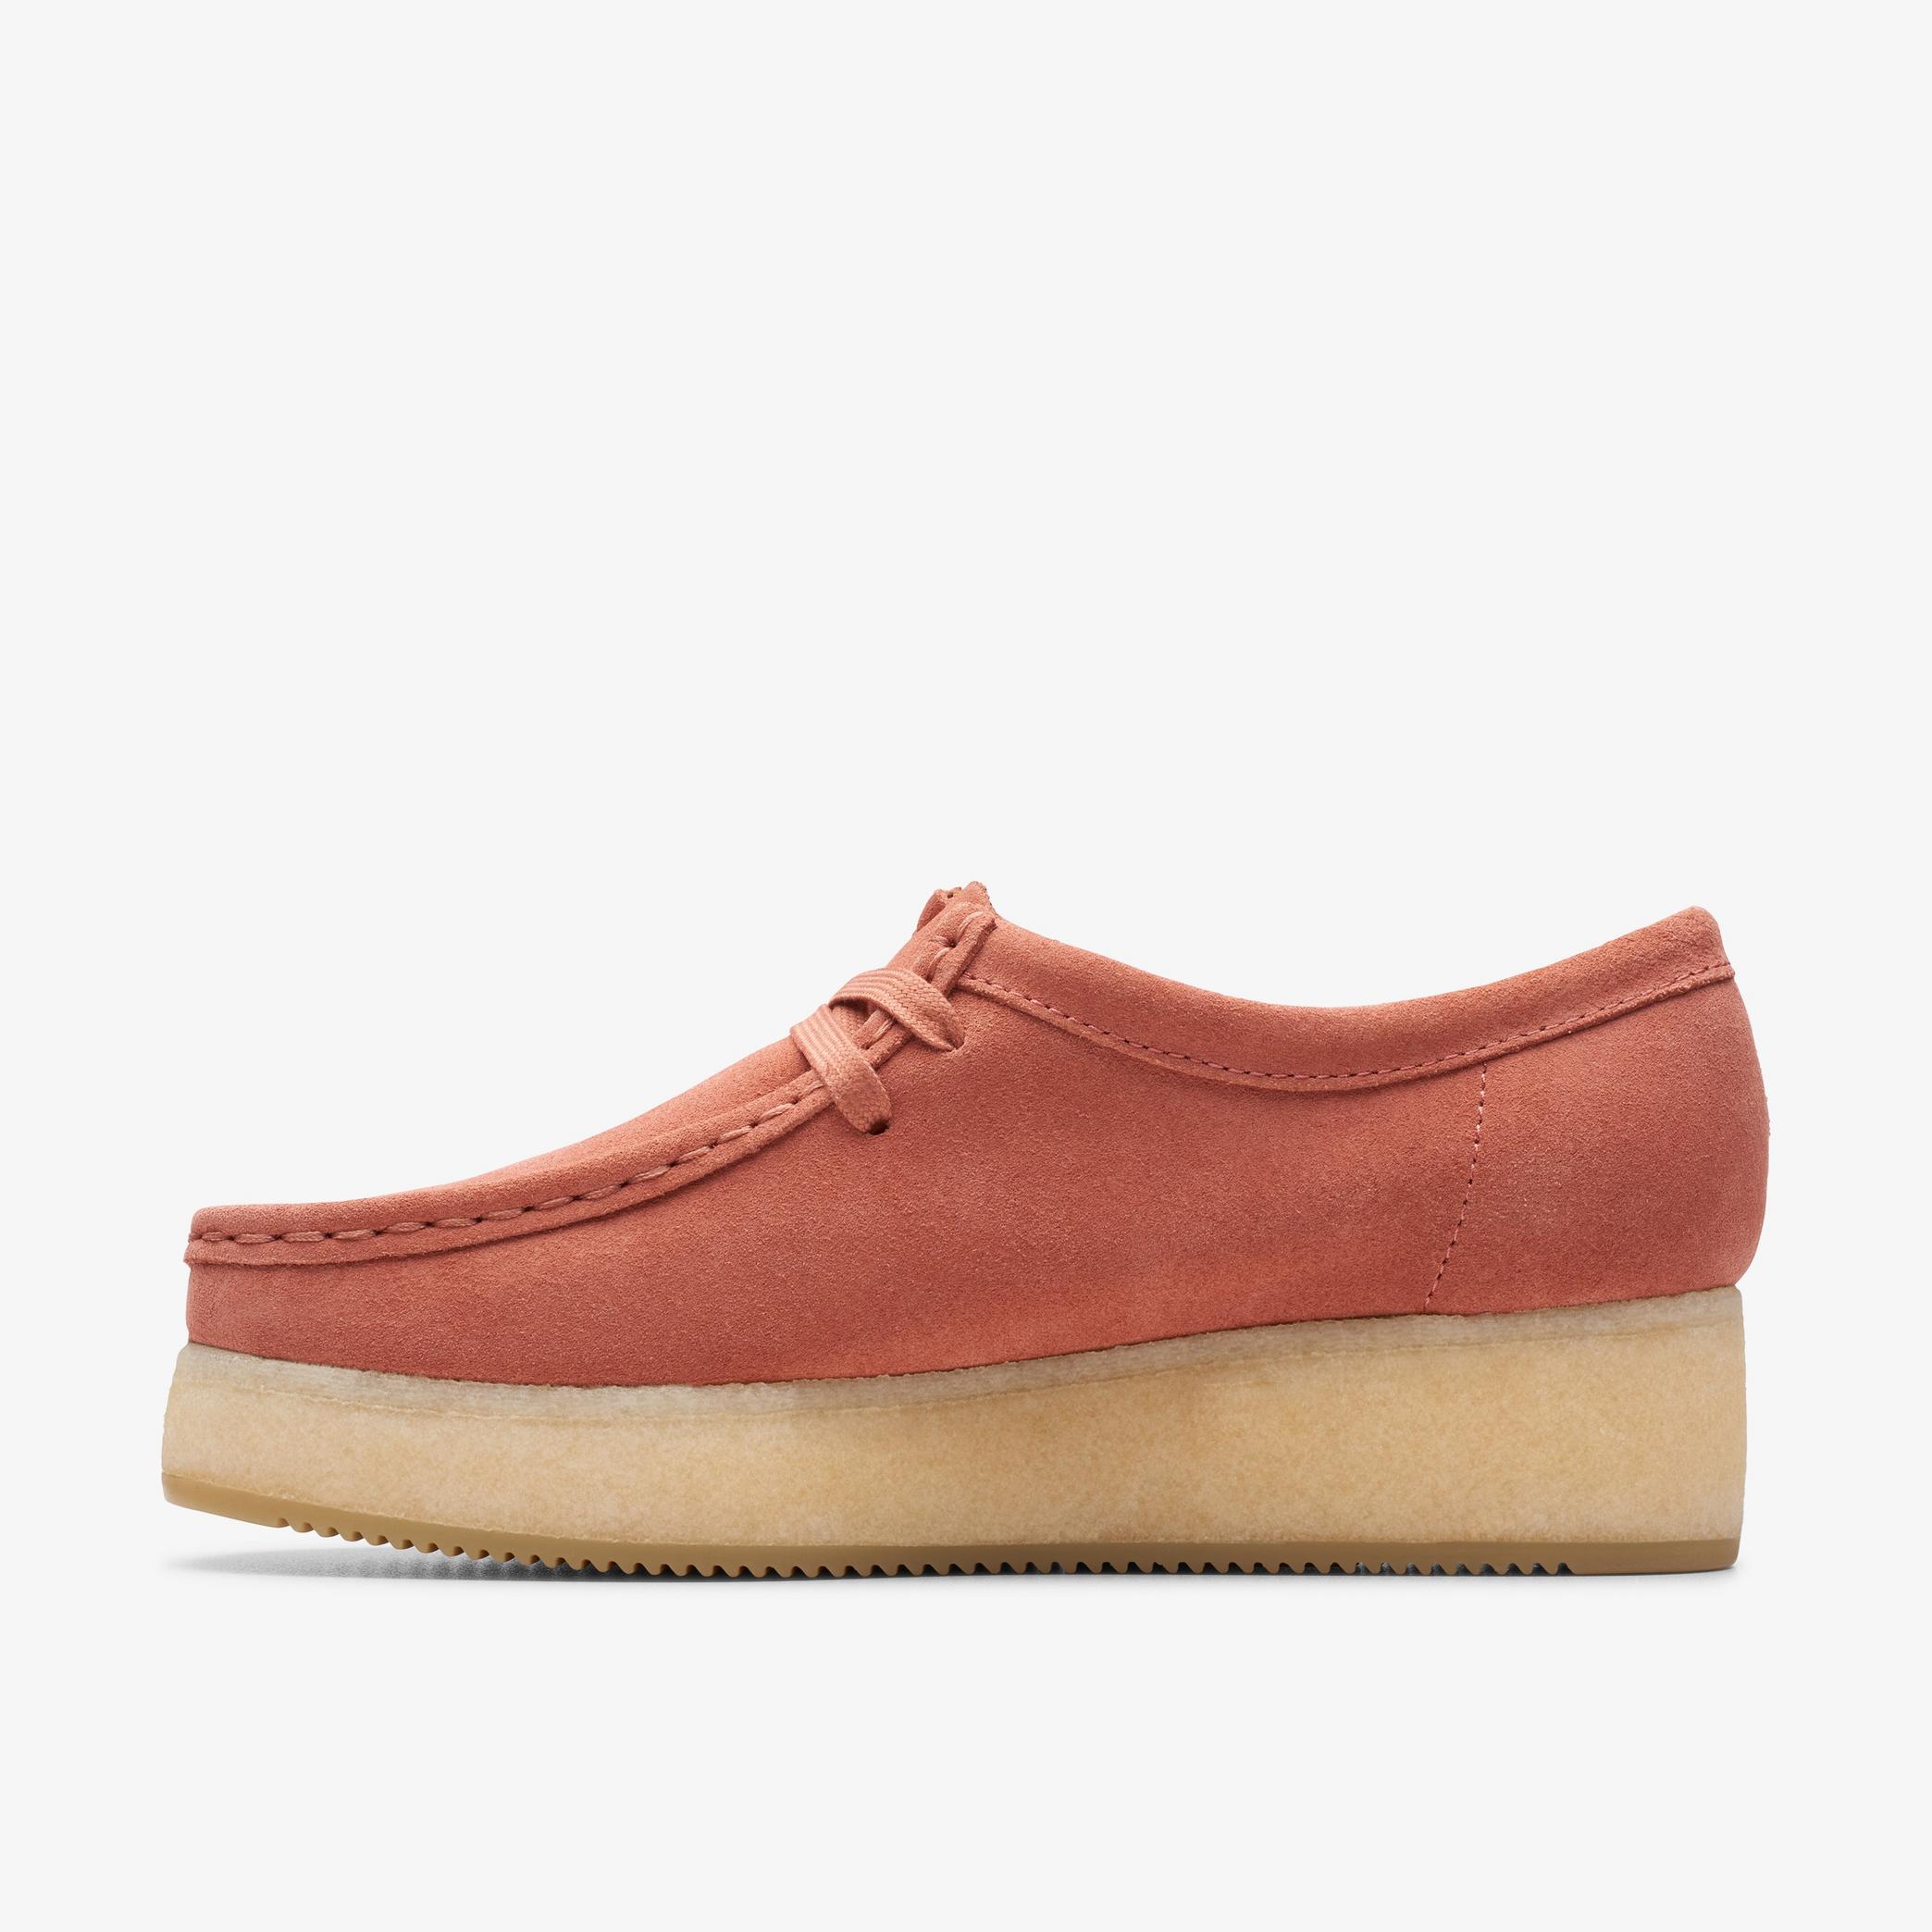 Wallacraft Bee Terracotta Suede Shoes, view 2 of 7